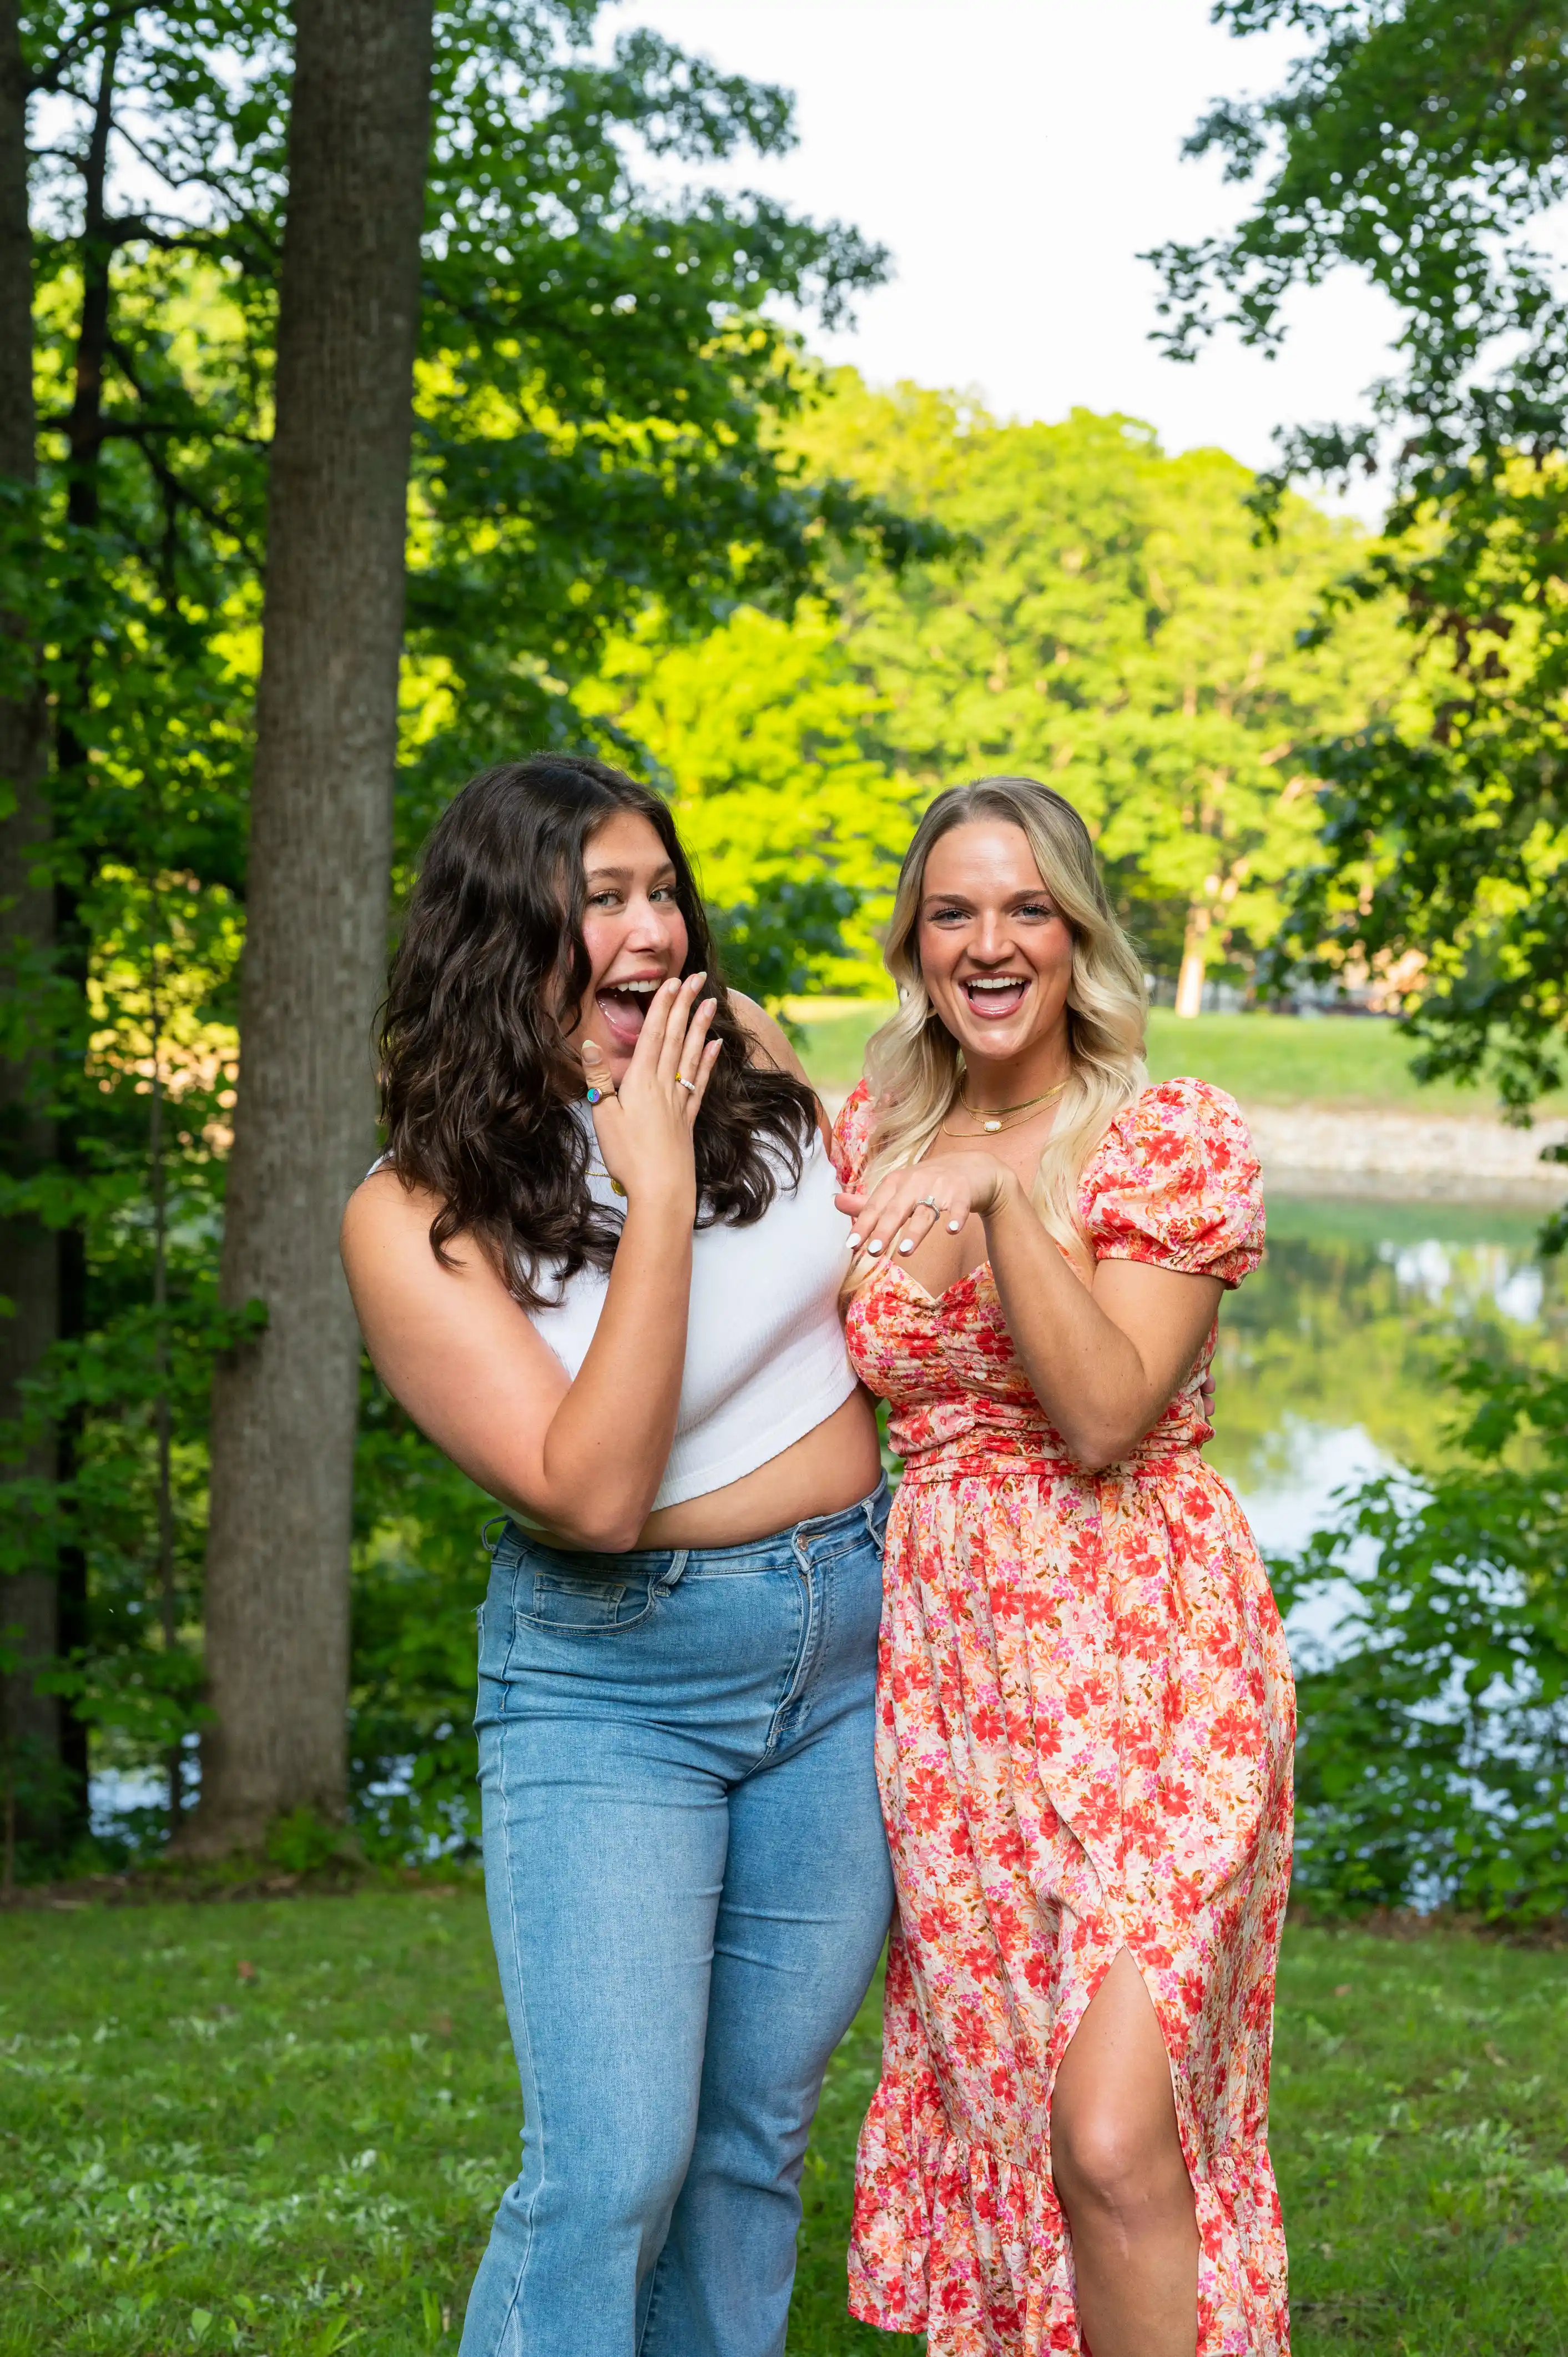 Two smiling women standing outdoors, one gesturing a shush sign, with trees and a pond in the background.